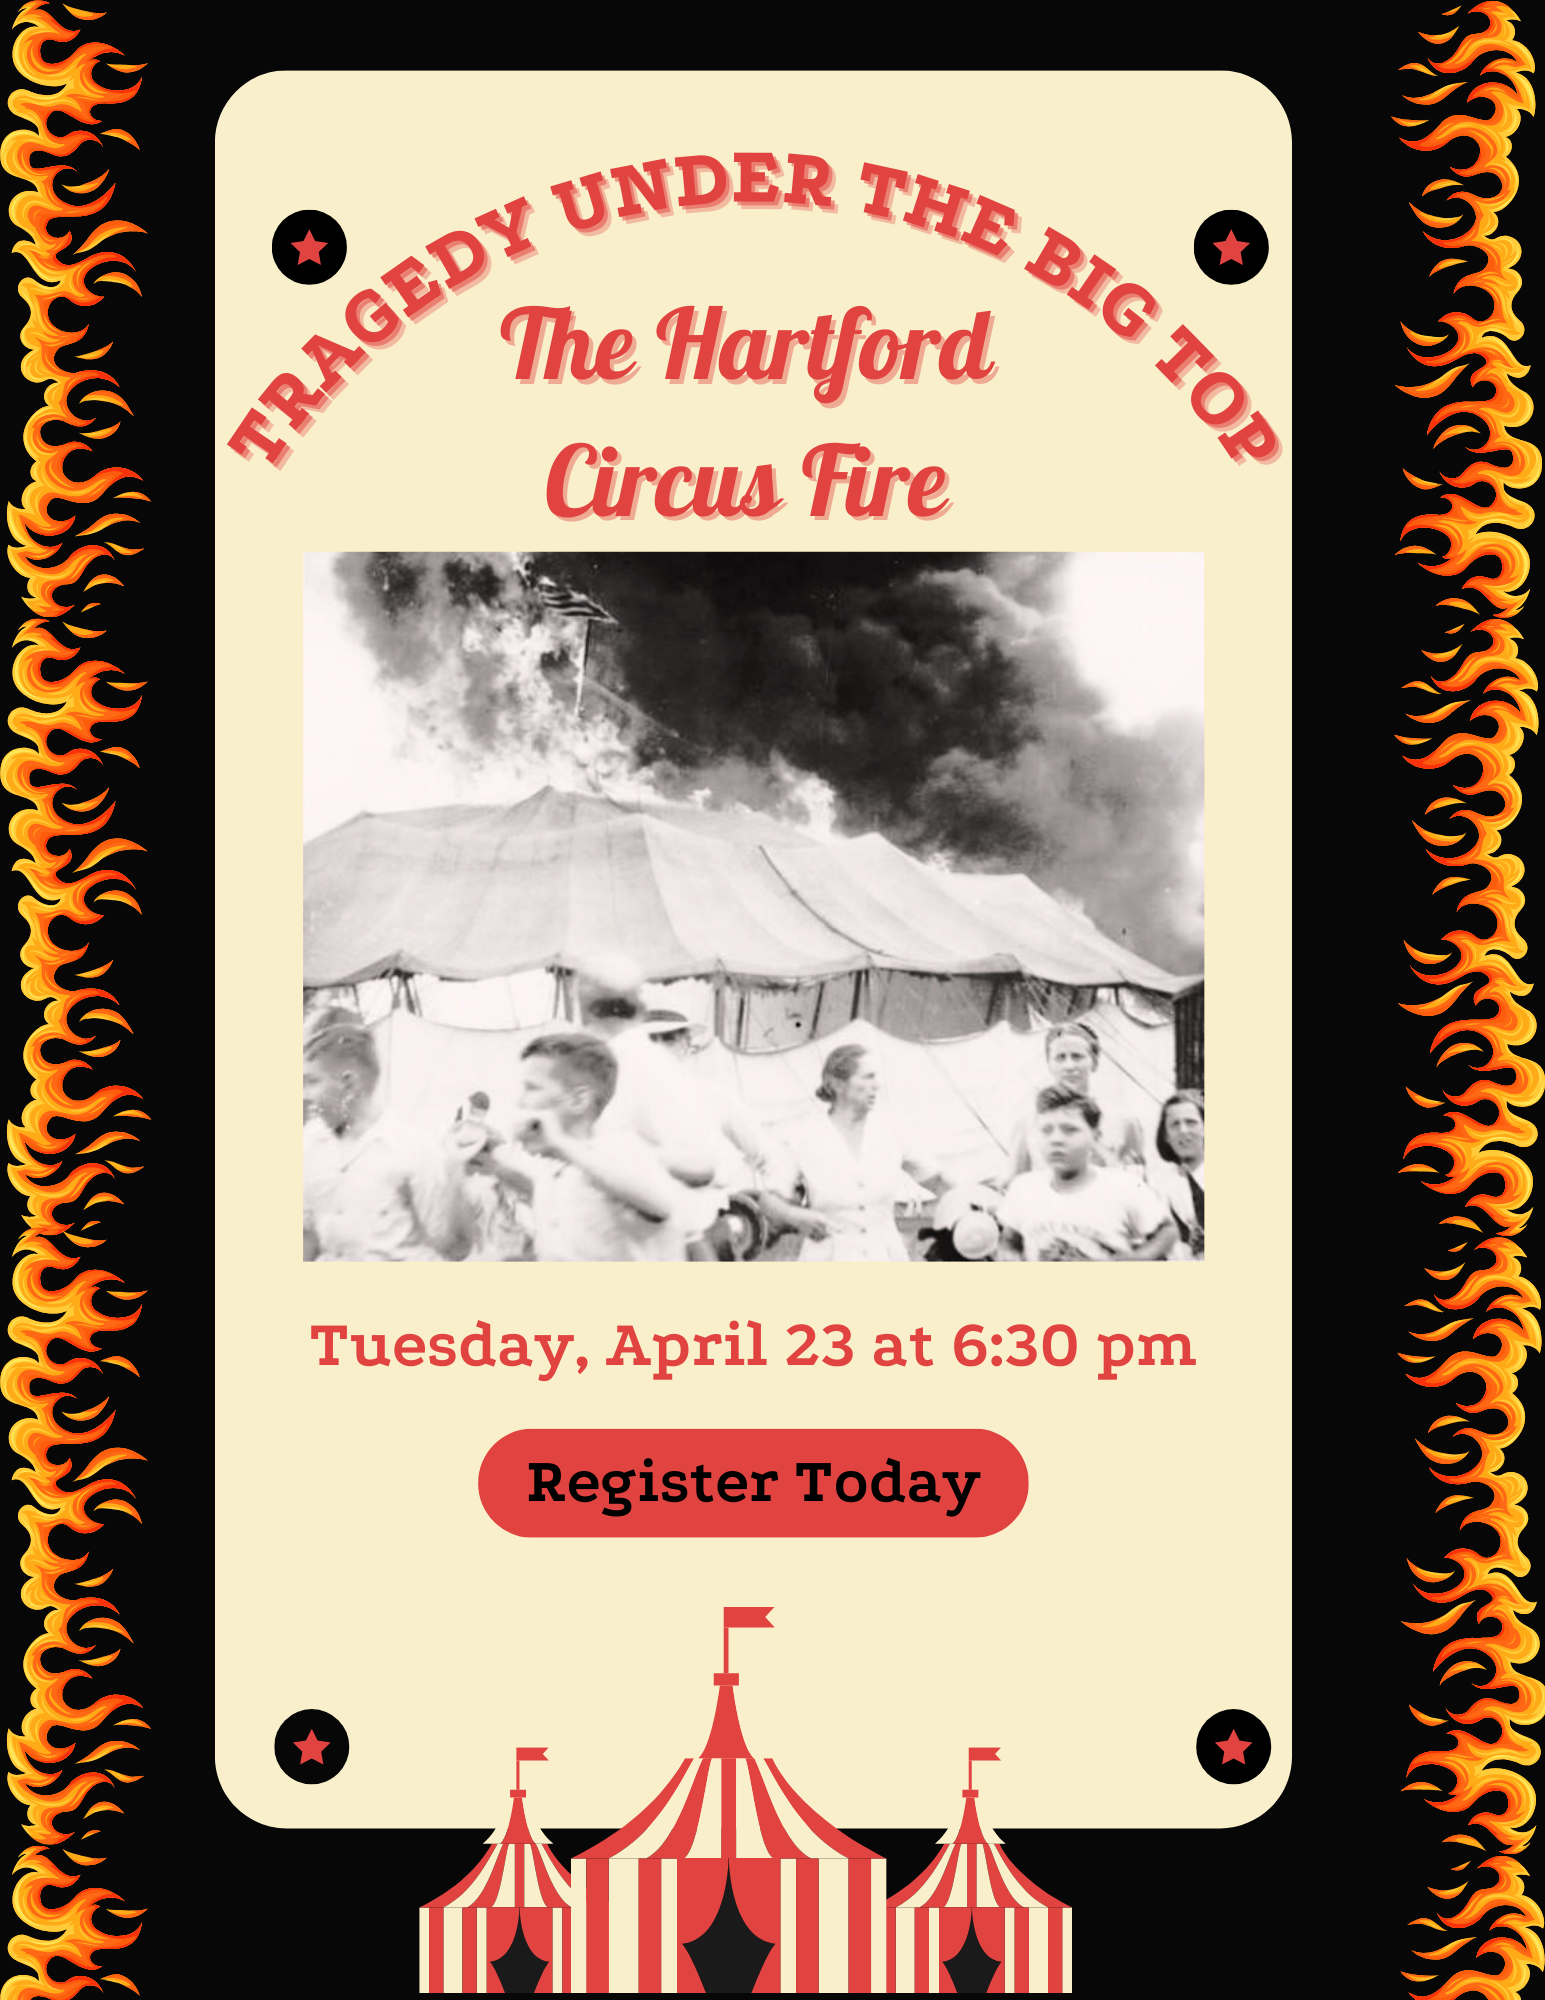 Flyer for Hartford Circus Fire